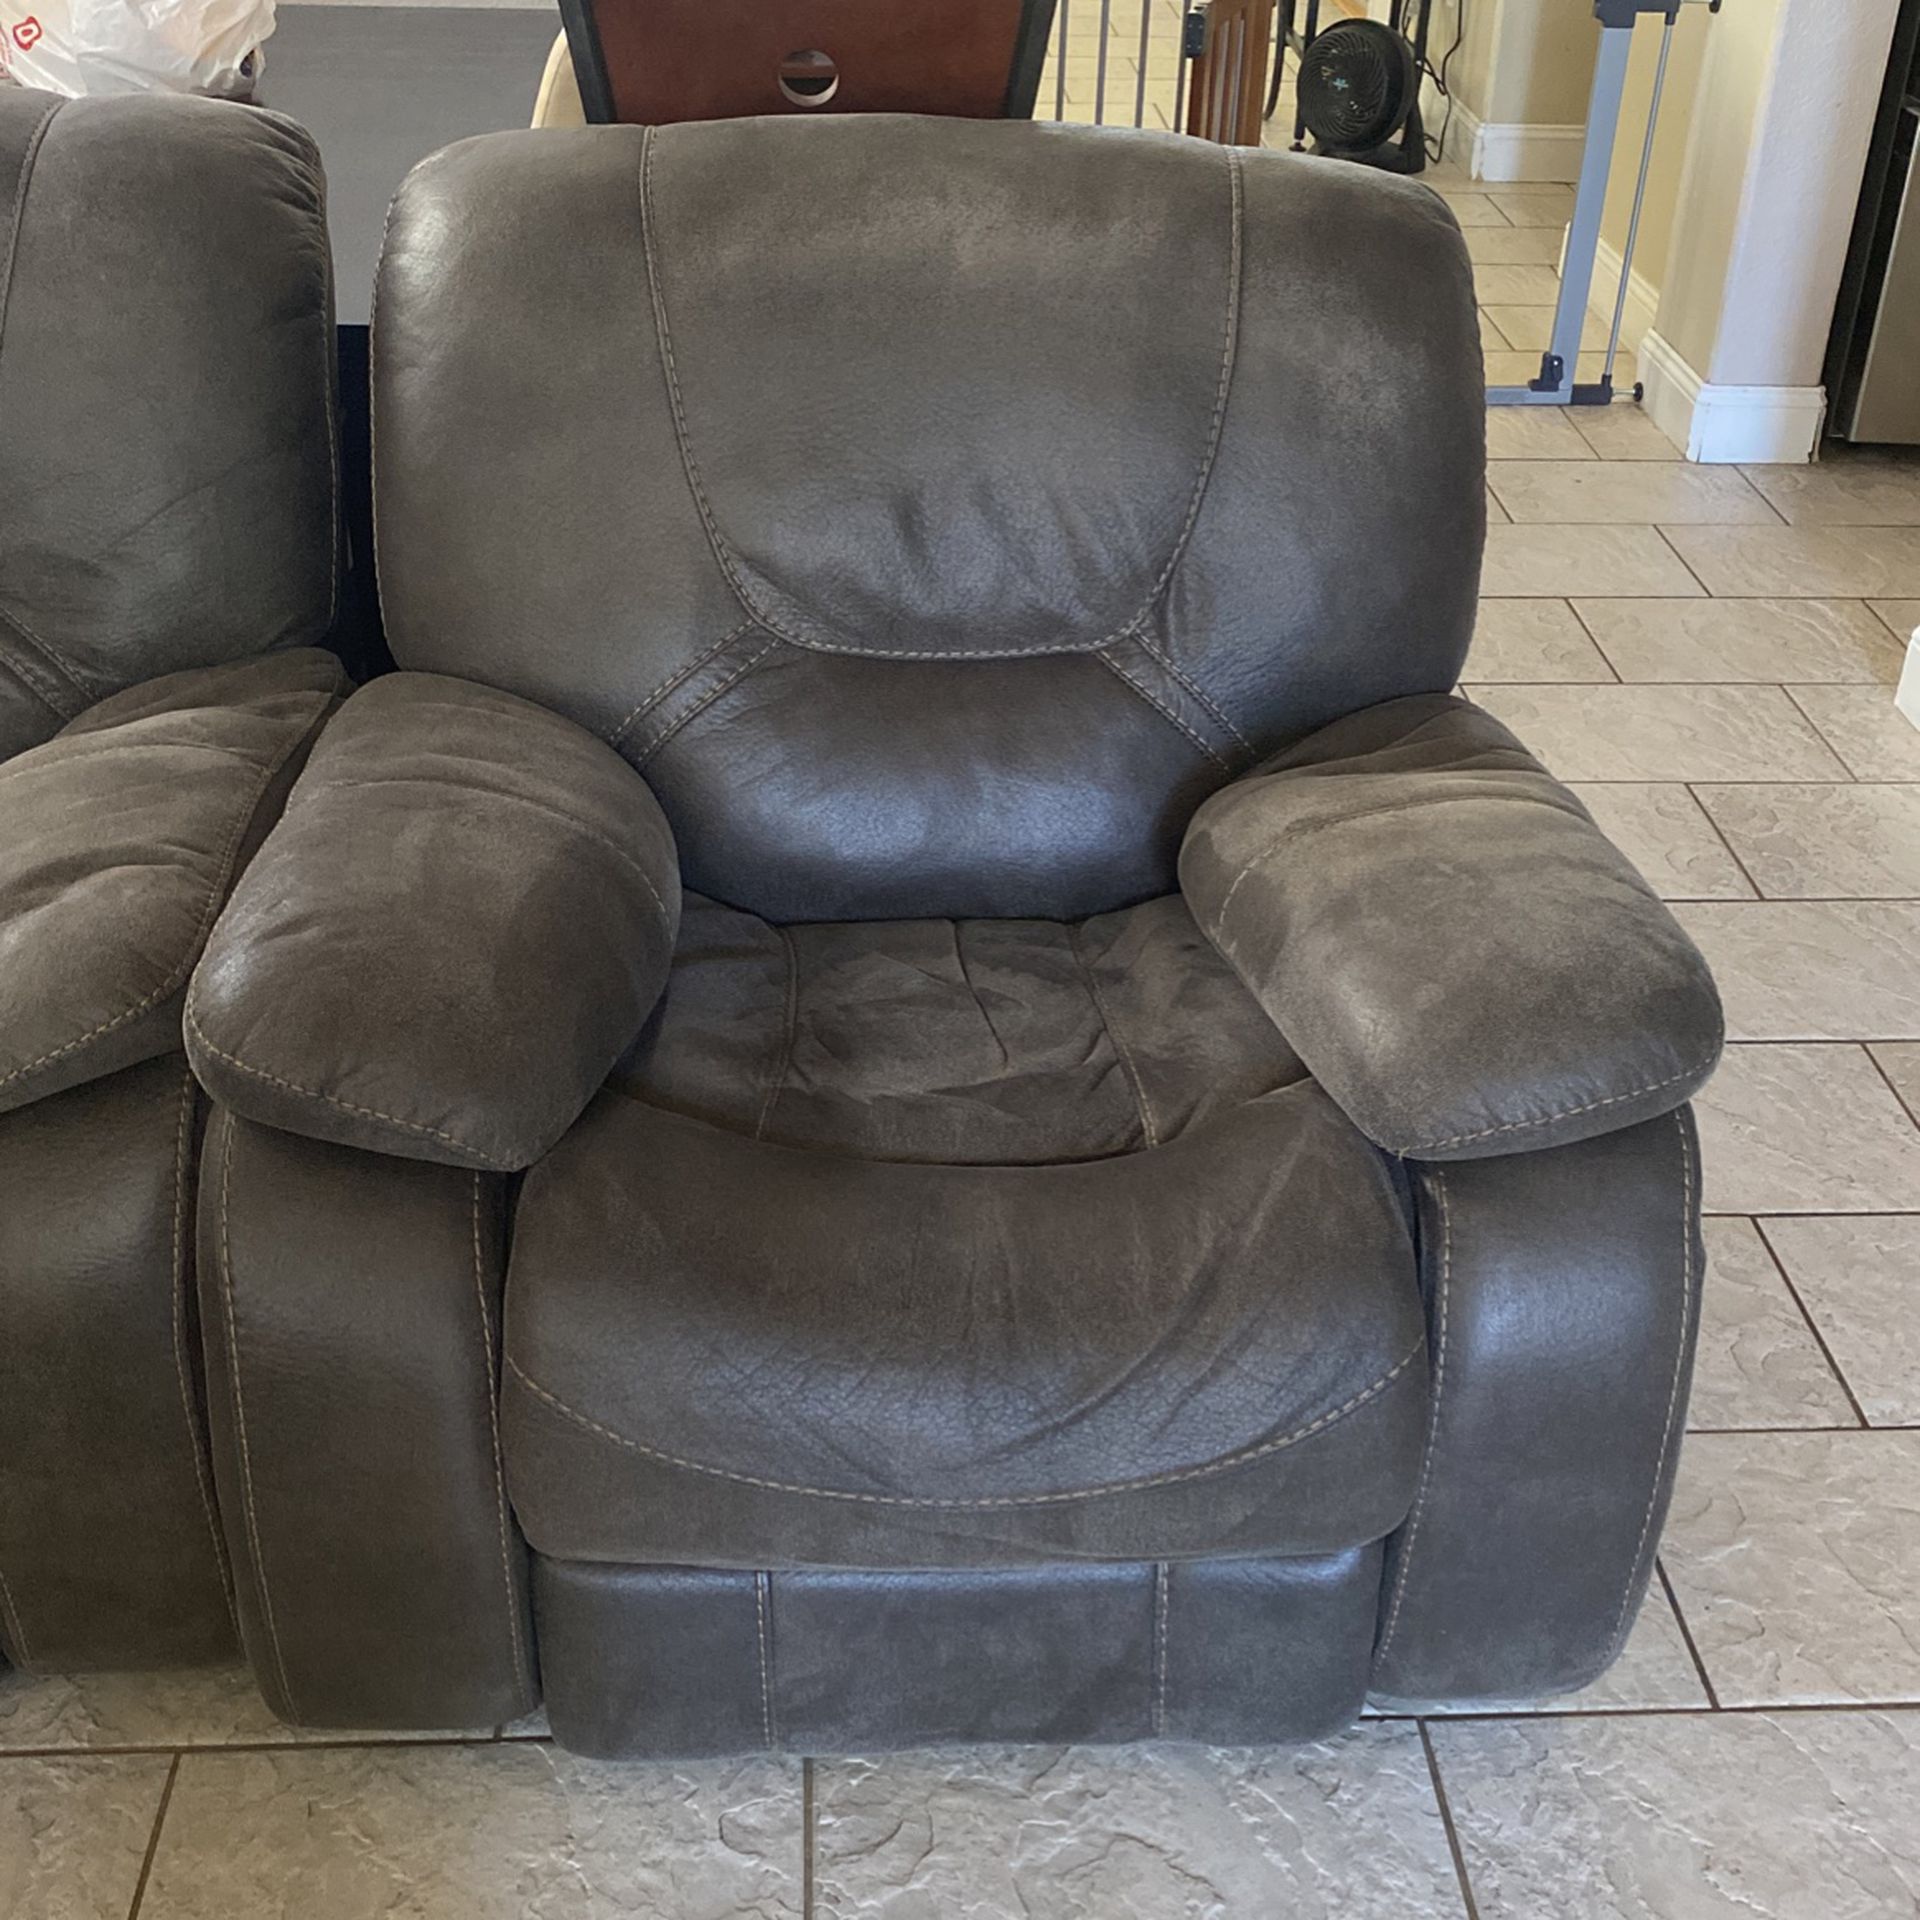 Couches And lounge chairs for sale